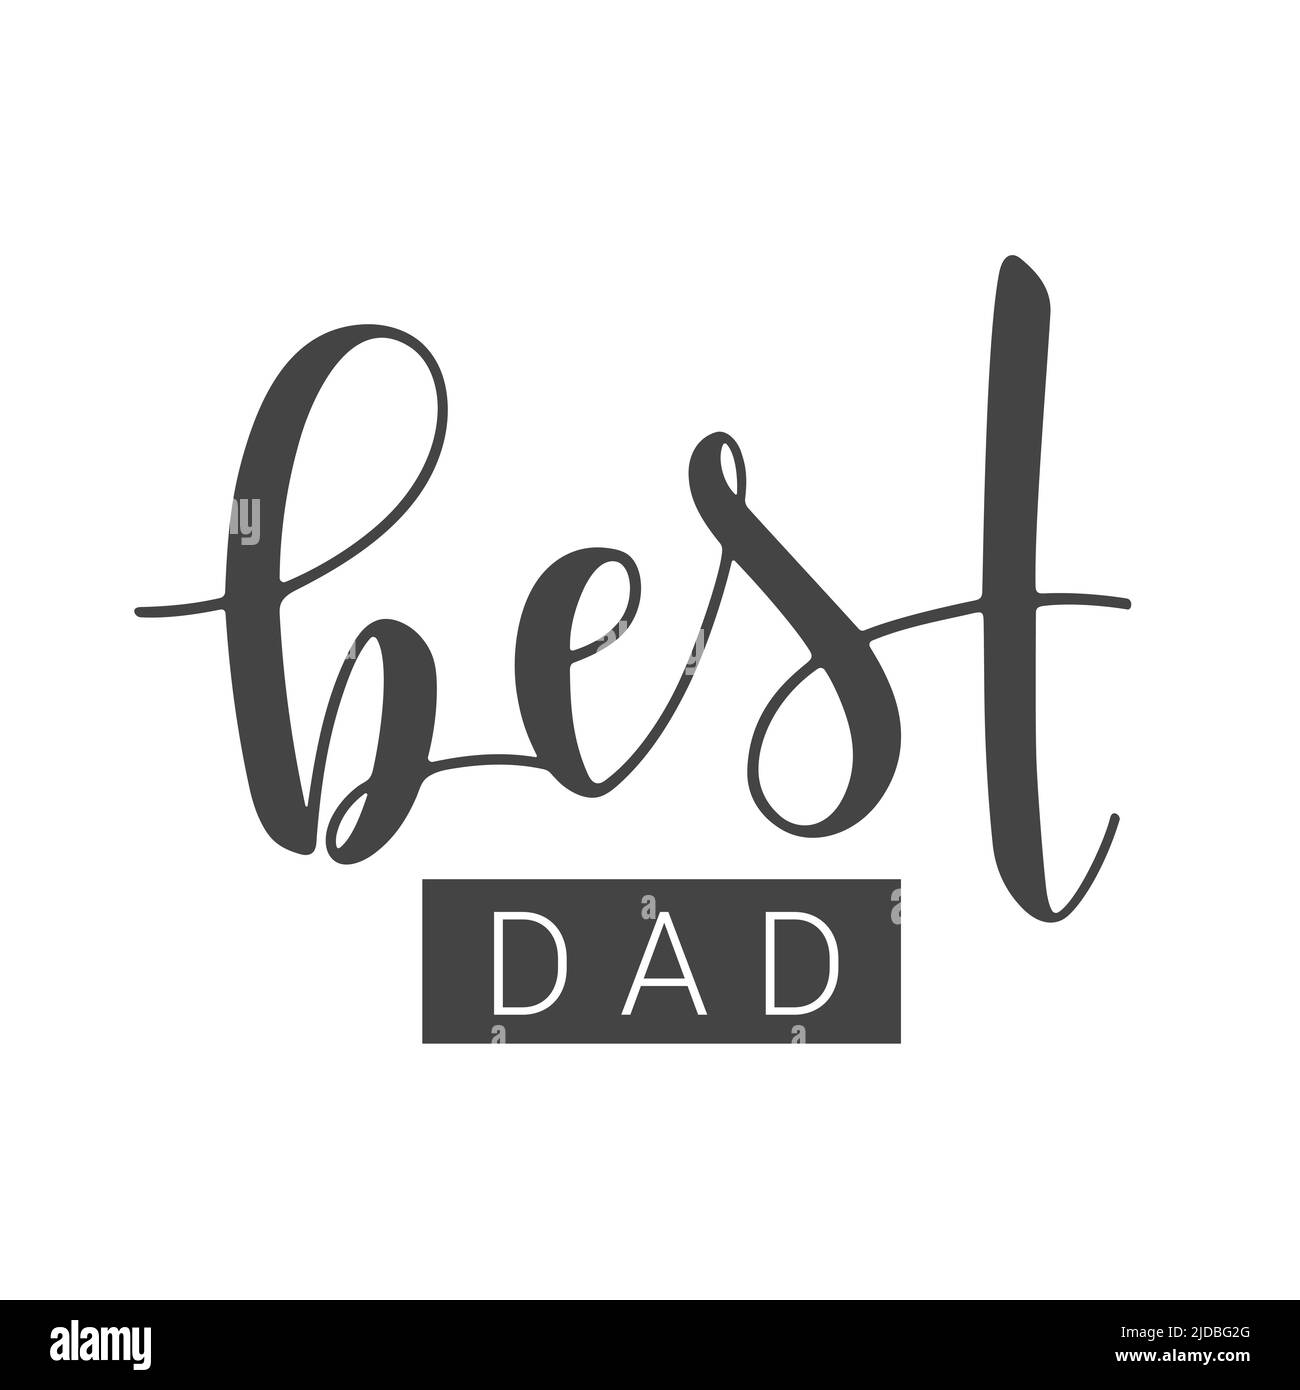 Handwritten Lettering of Best Dad. Template for Banner, Greeting Card, Postcard, Invitation, Party, Poster, Sticker, Print or Web Product. Stock Vector